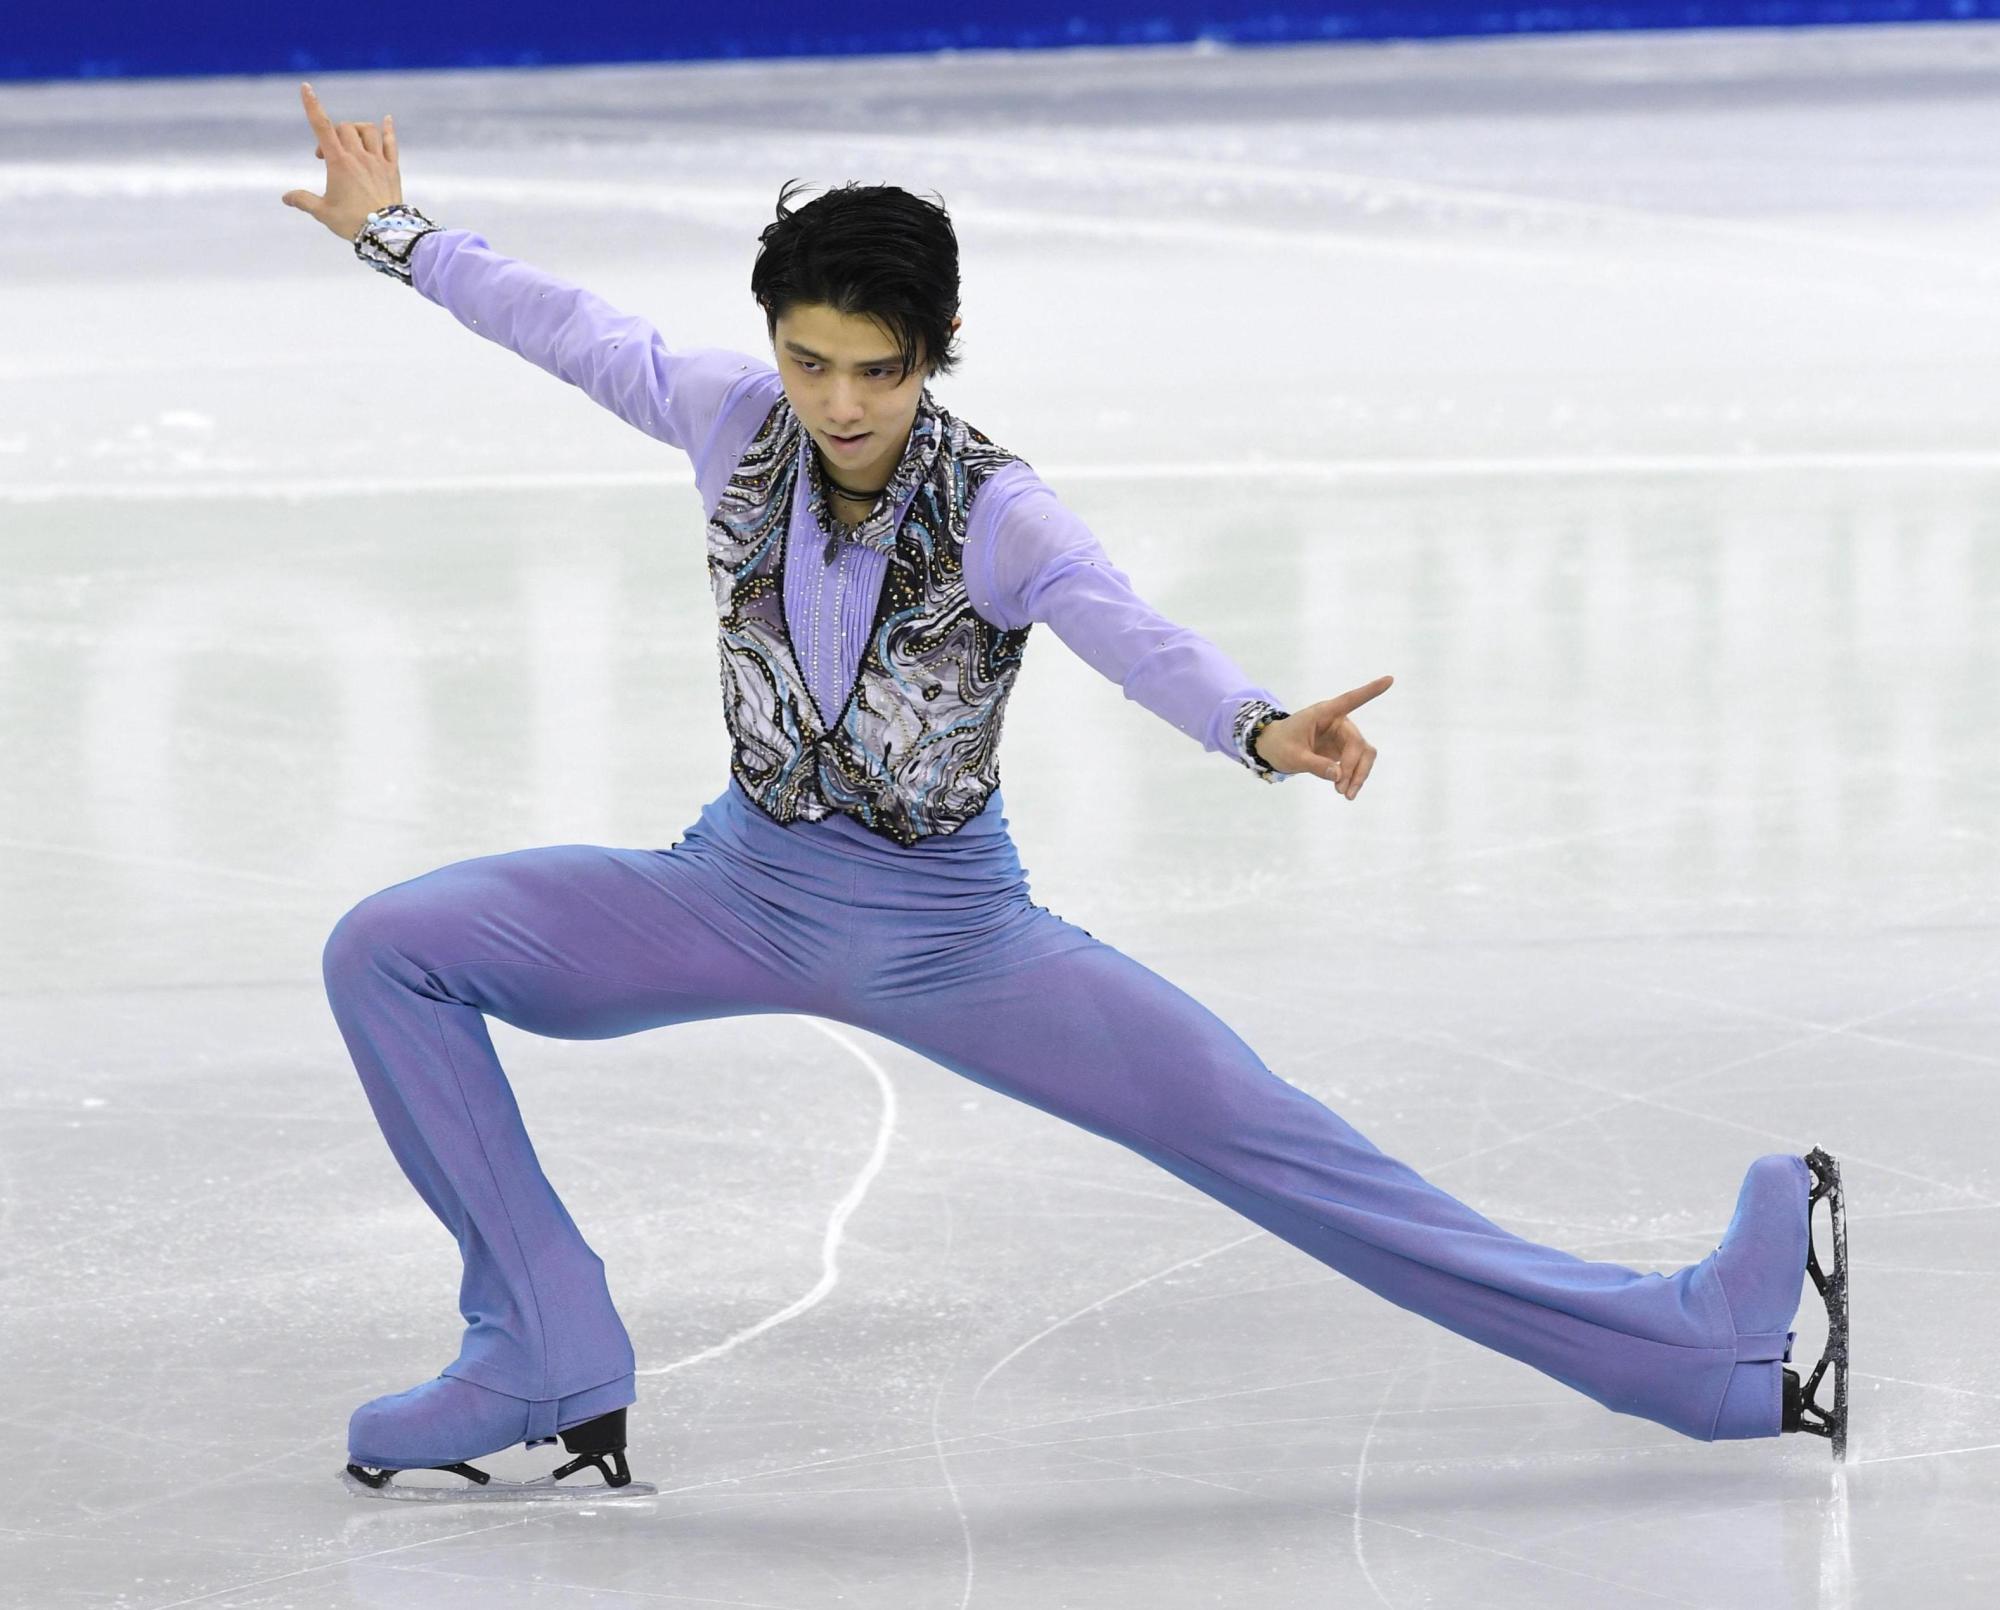 Yuzuru Hanyu skates during the men's short program at the Four Continents Championships on Friday in Gangneung, South Korea. Hanyu received 97.04 points and sits in third place. | KYODO